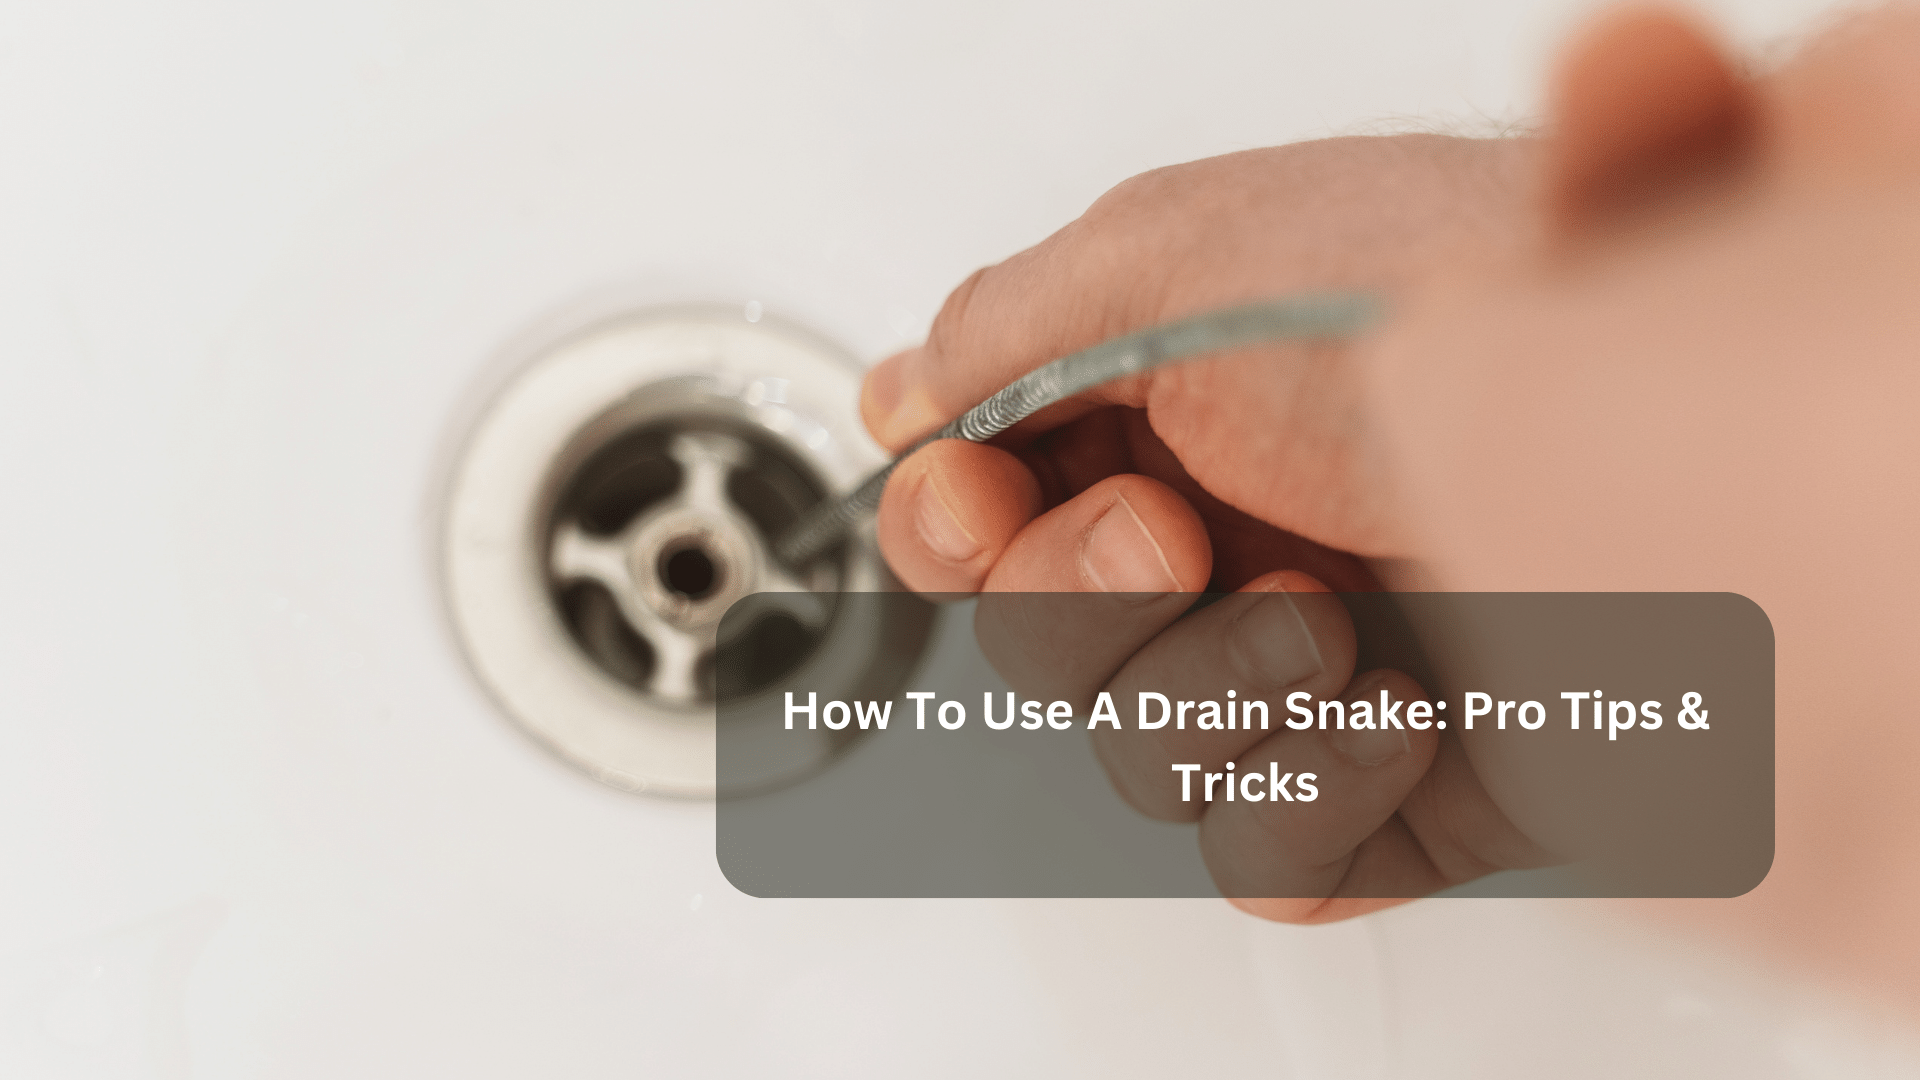 Everything You Need To Know About Using A Plumber's Snake